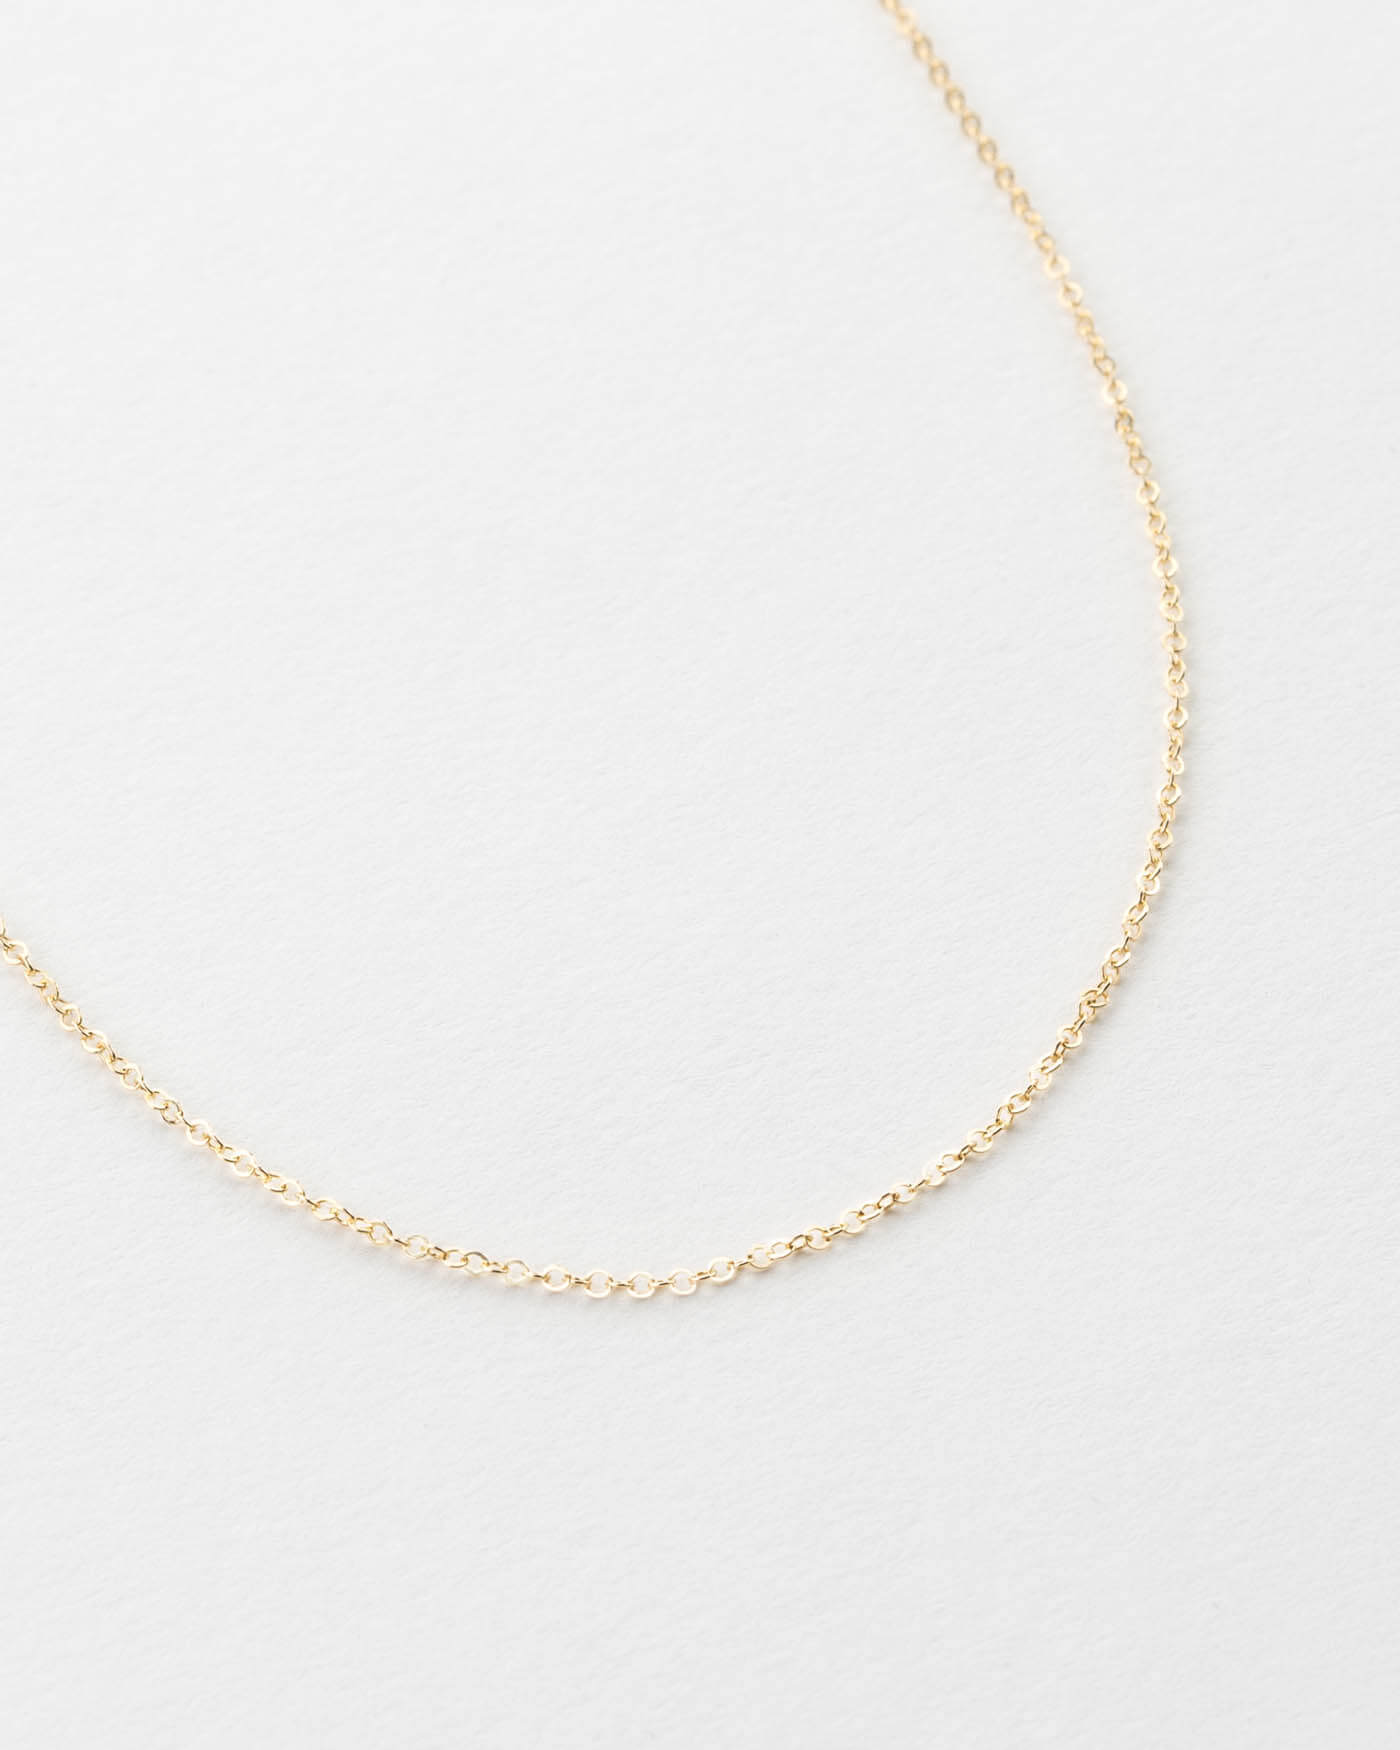 Thin ROPE Chain Necklace, Any Length, 14k Gold Fill or Sterling